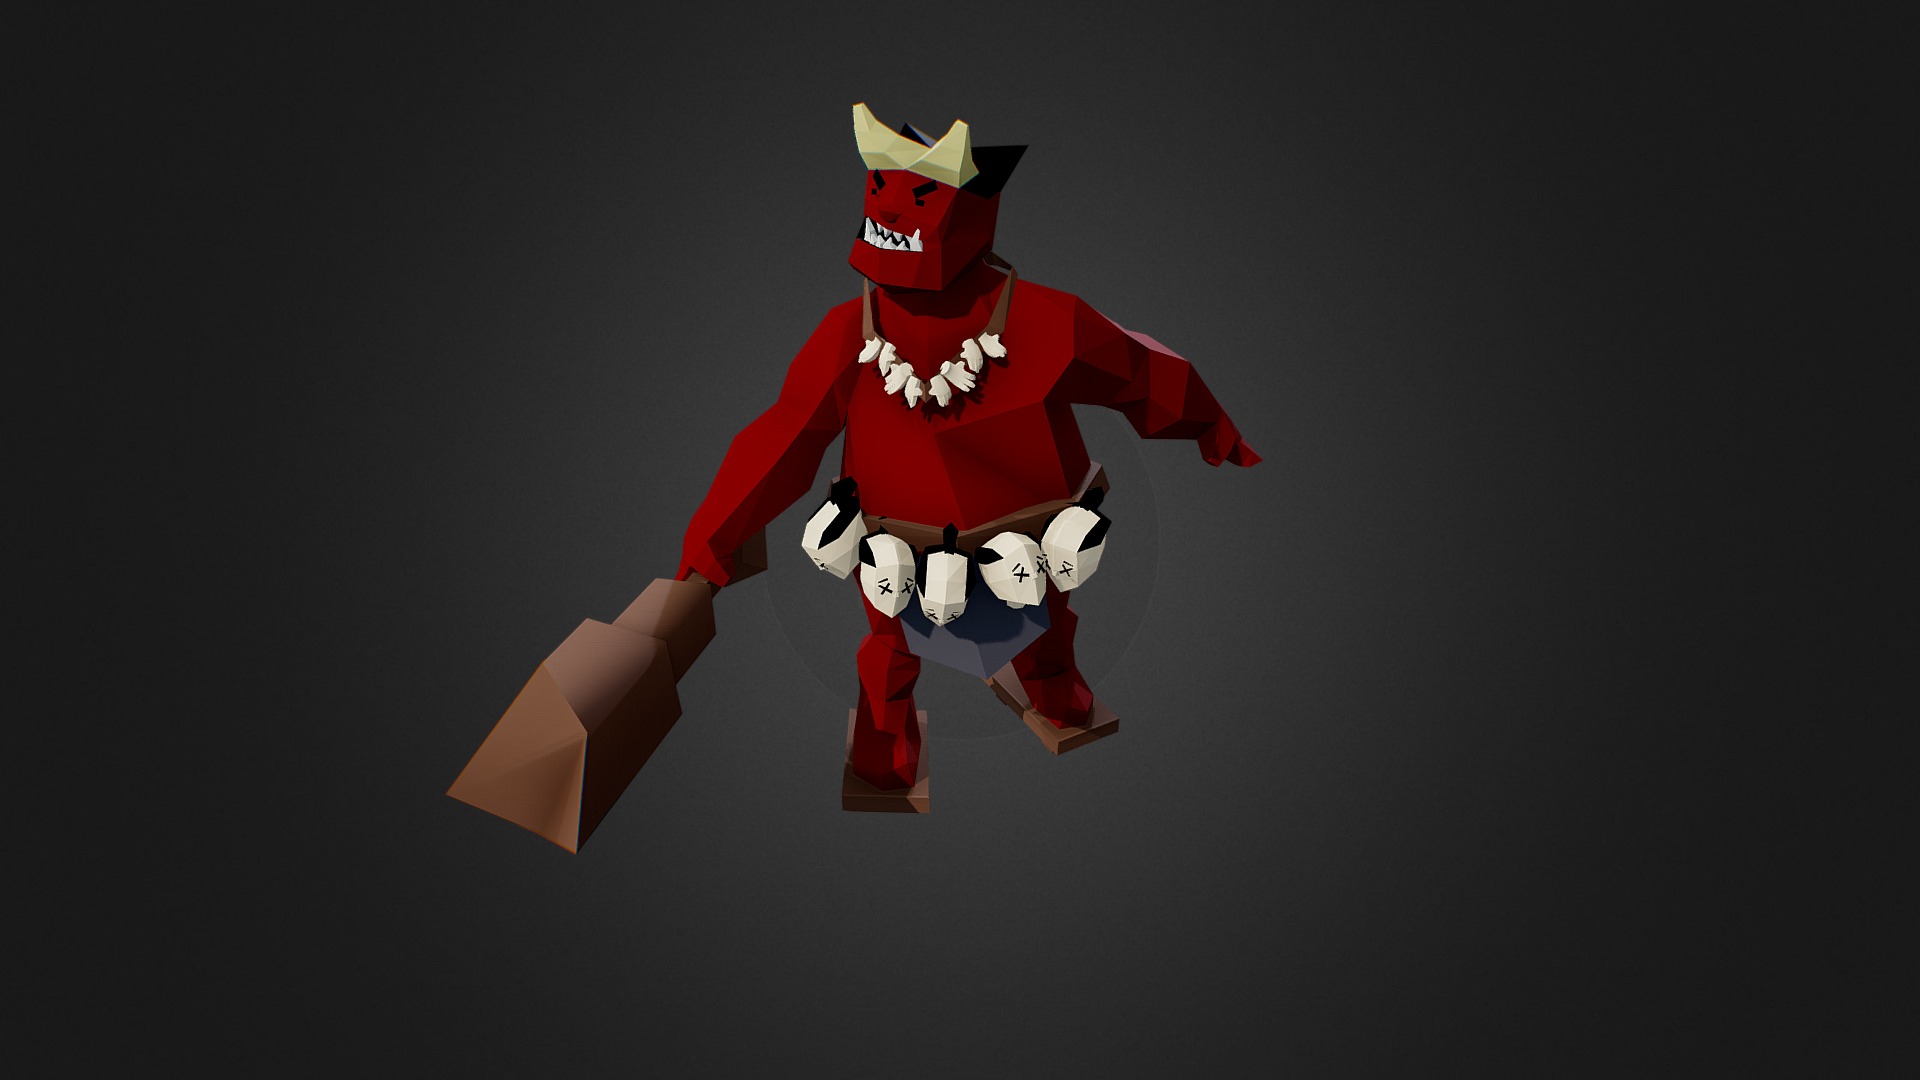 3D model Oni - This is a 3D model of the Oni. The 3D model is about a red and white stuffed animal.